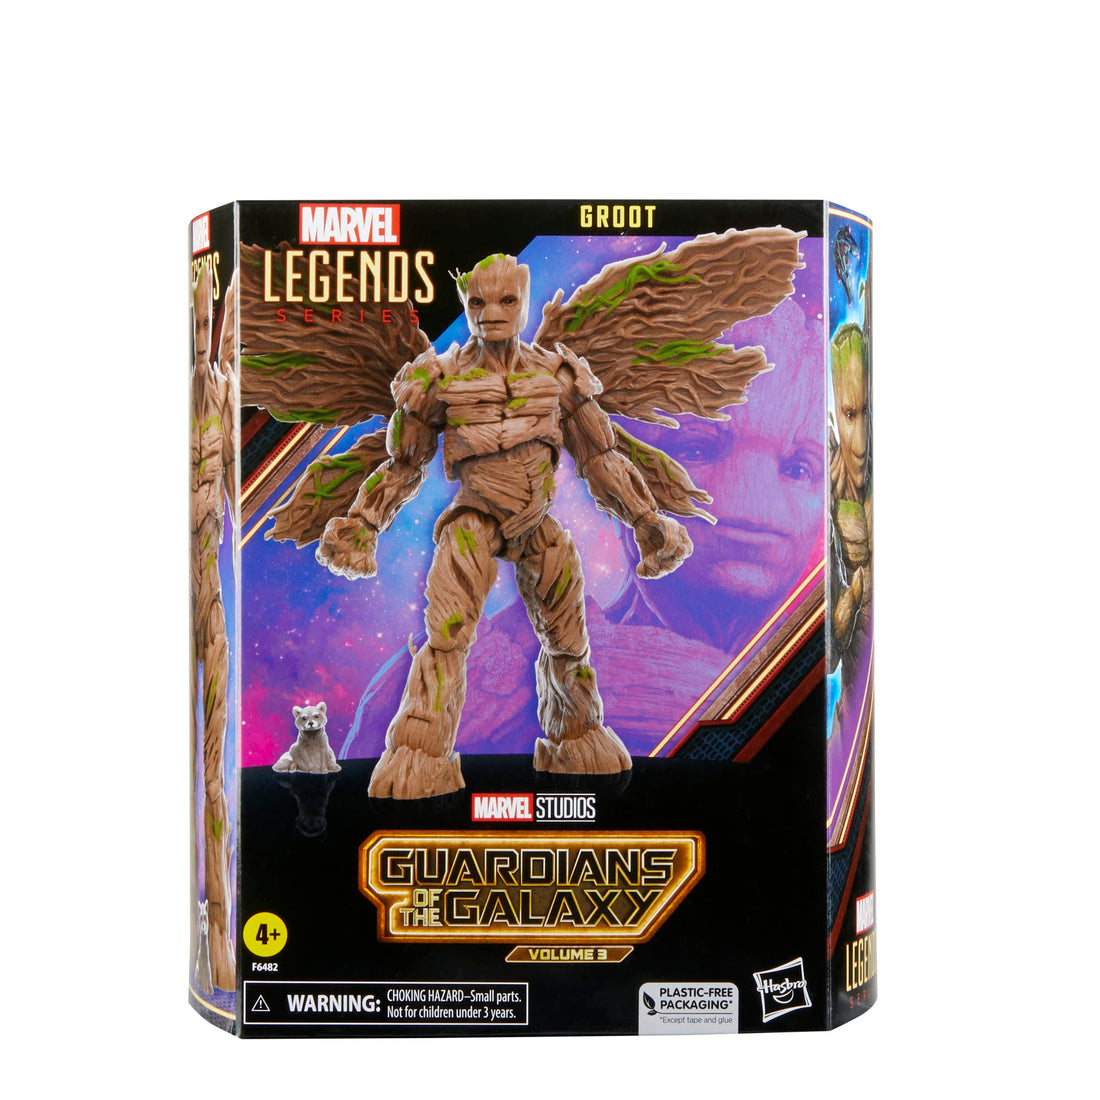 Hasbro Marvel Legends Series Groot, Guardians of the Galaxy Vol. 3 6-Inch Action Figures